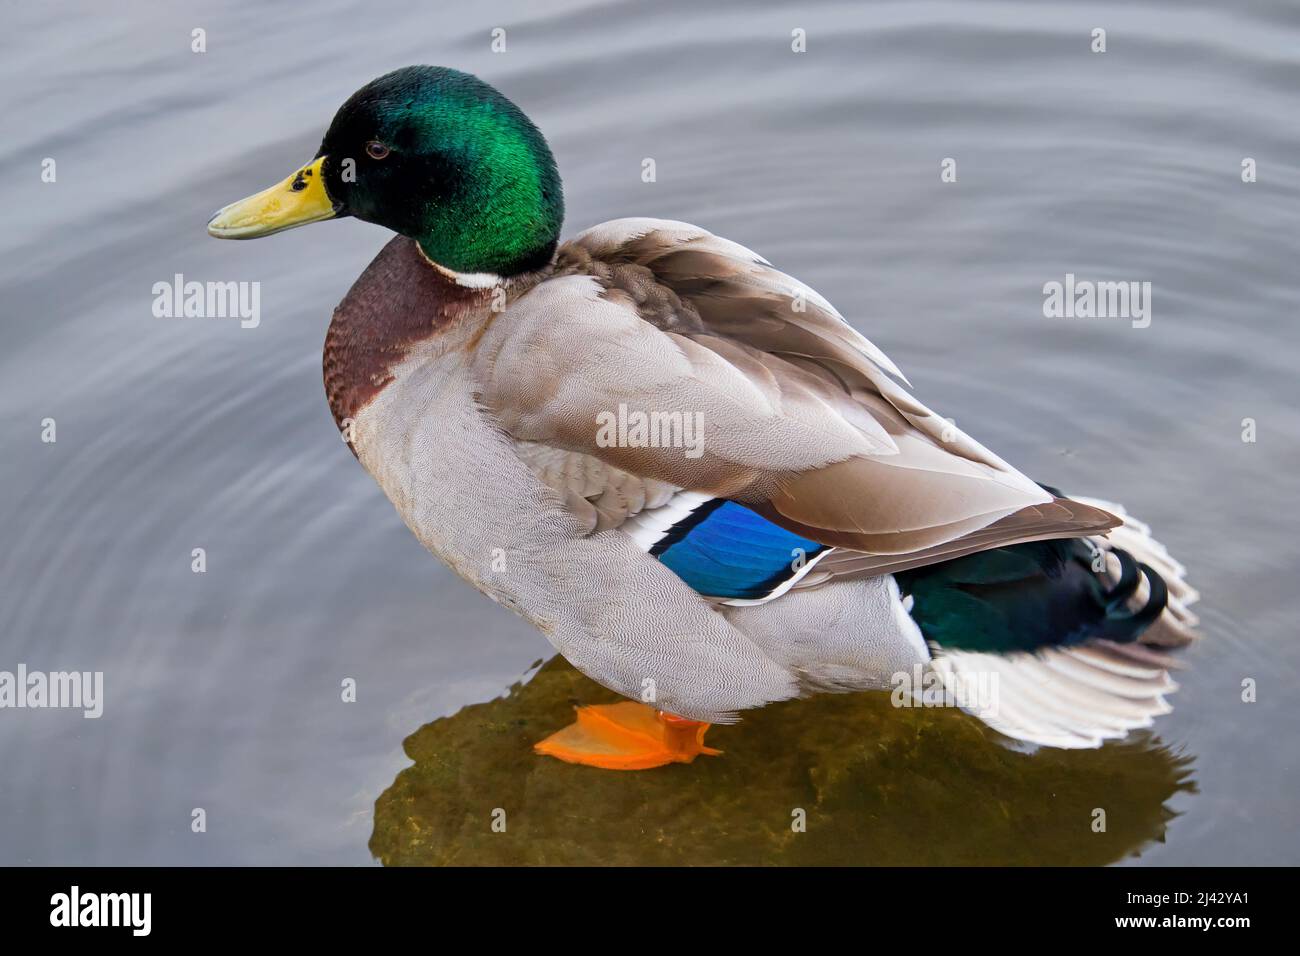 An exotic duck standing in shallow water in a park lake Stock Photo